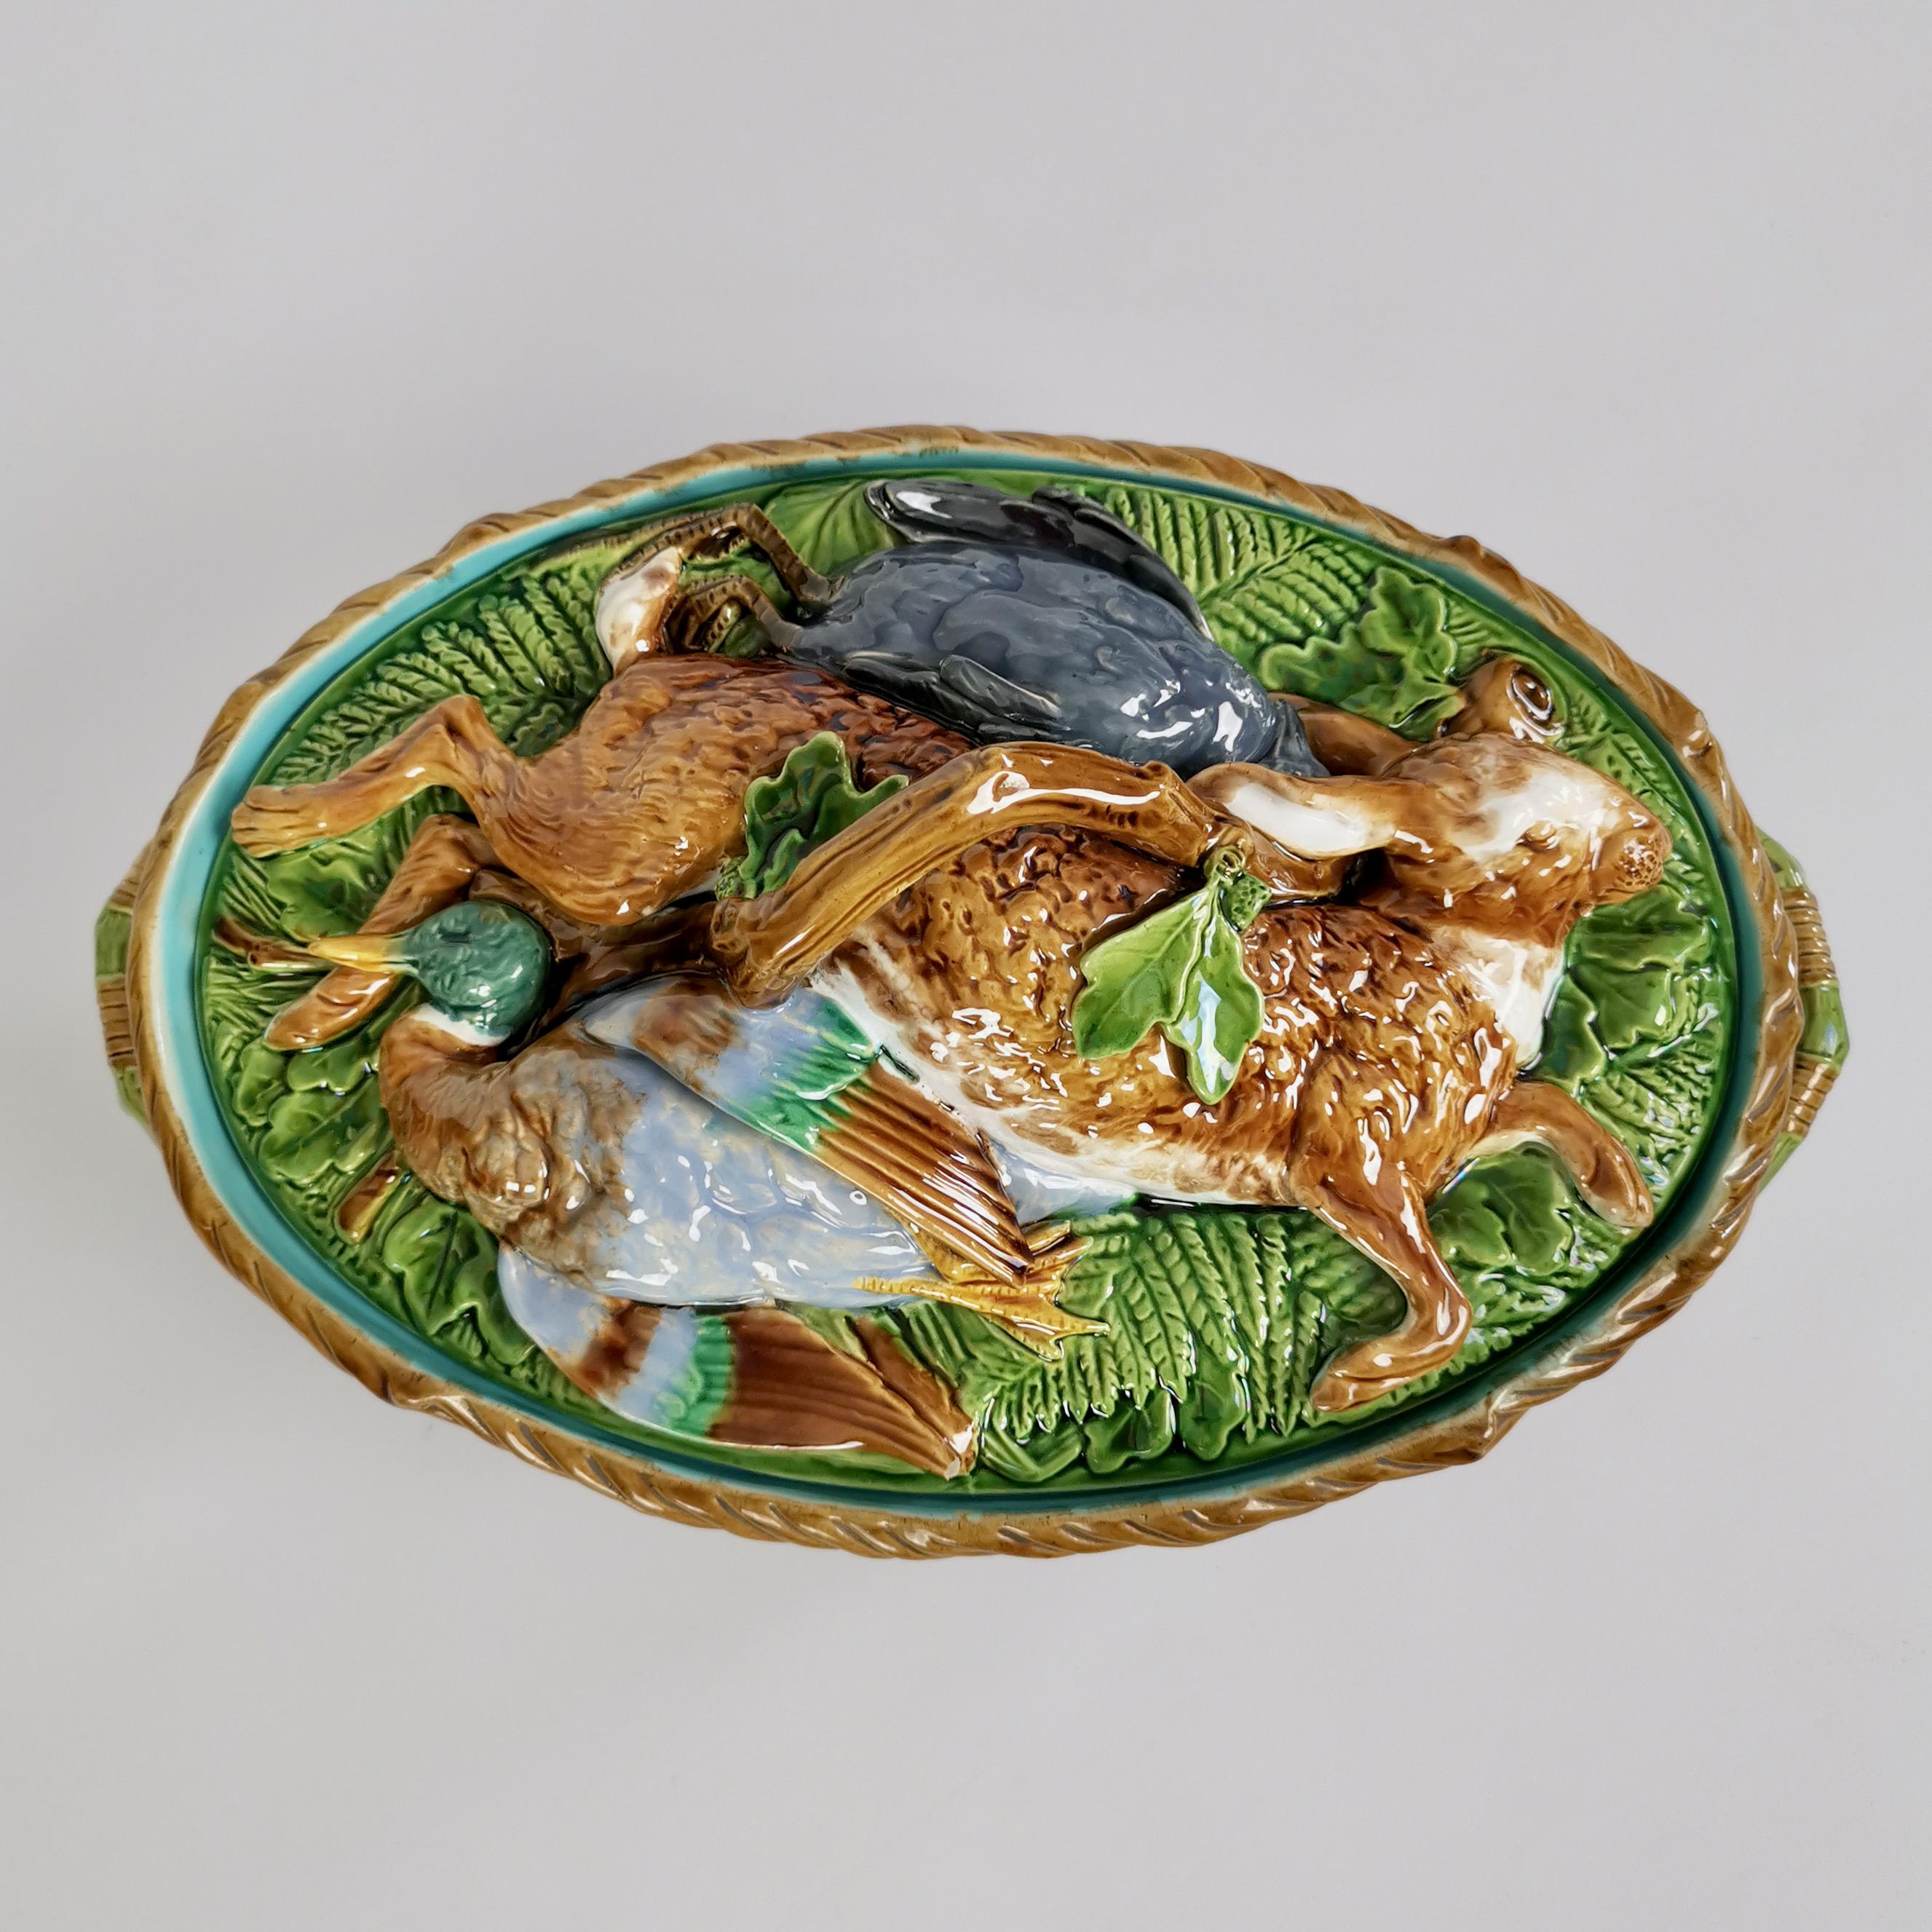 This is a stunning game pie tureen with cover made by Minton in 1881. The piece is made of majolica and has realistically relief-moulded game on the cover: a rabbit, a mallard and a pigeon.
 
This tureen would make a wonderful centre piece to a